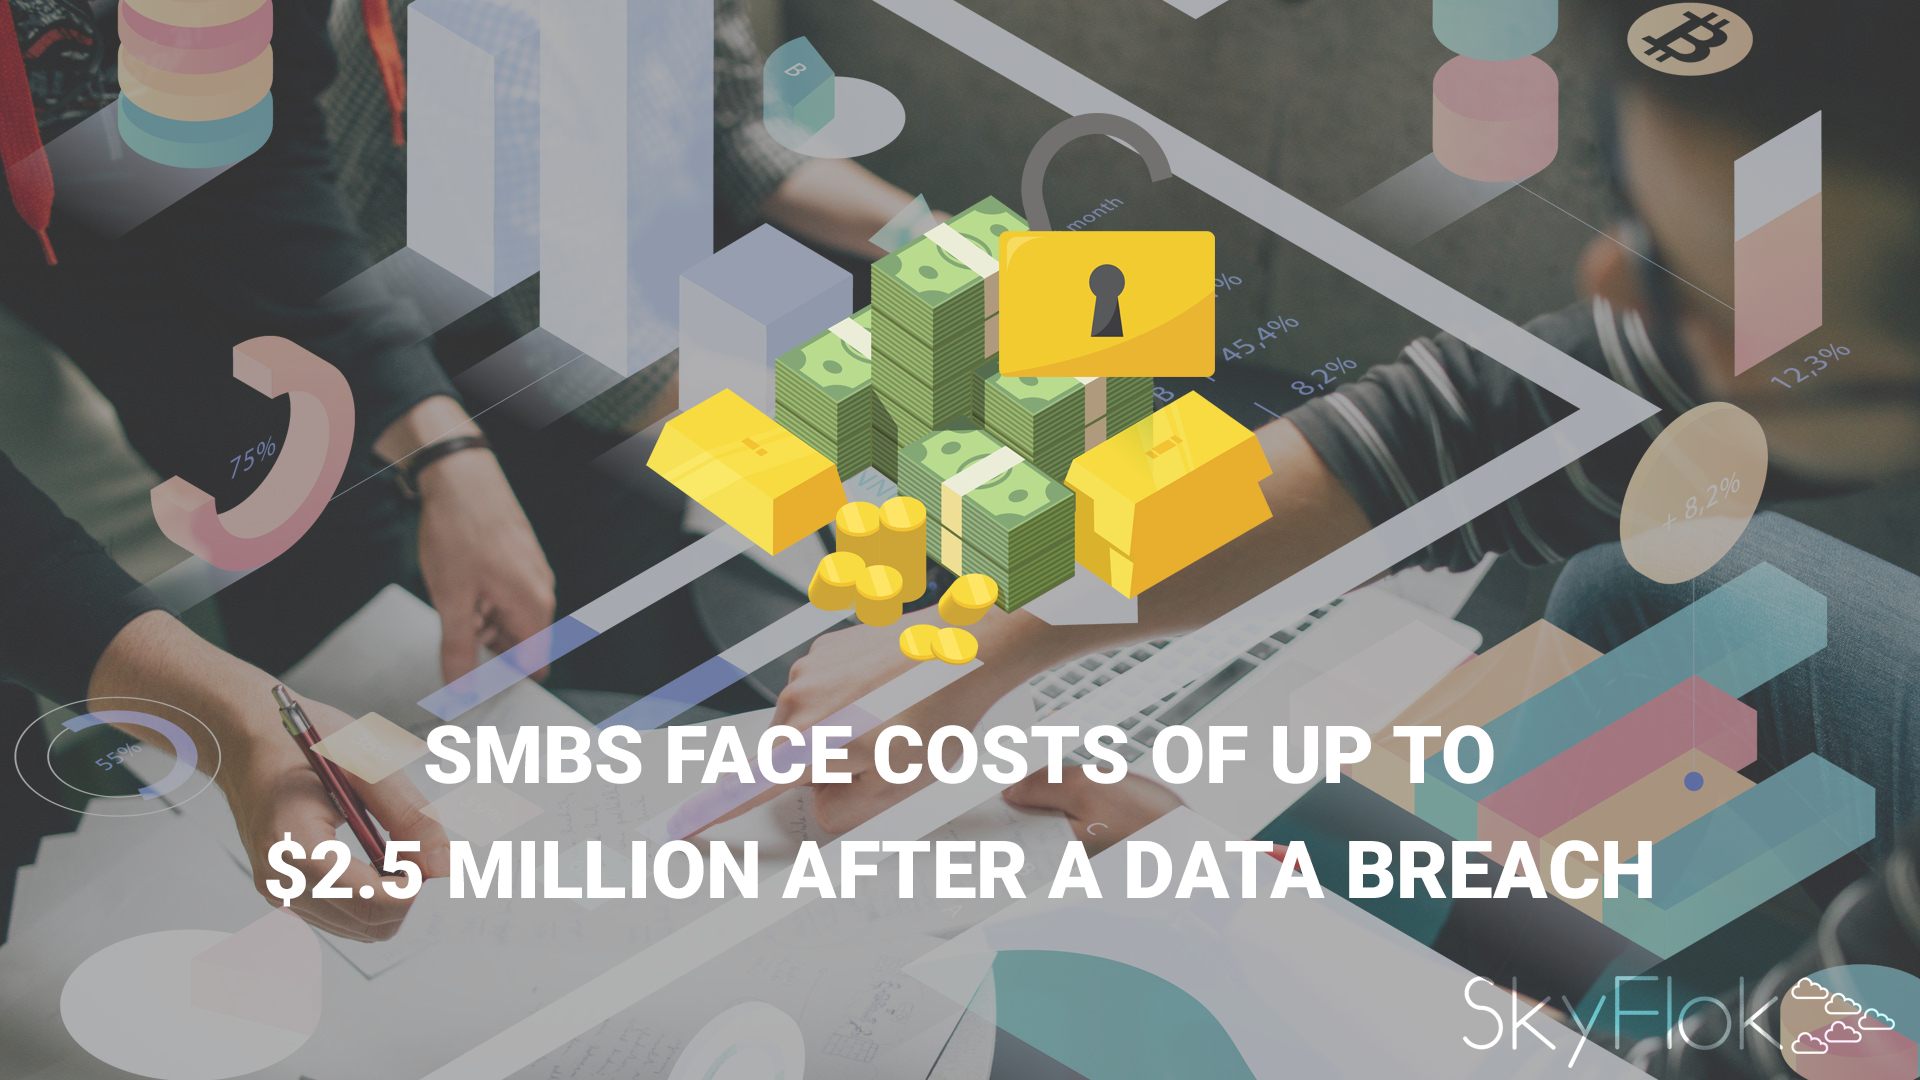 SMBs face costs of up to $2.5 million after a data breach